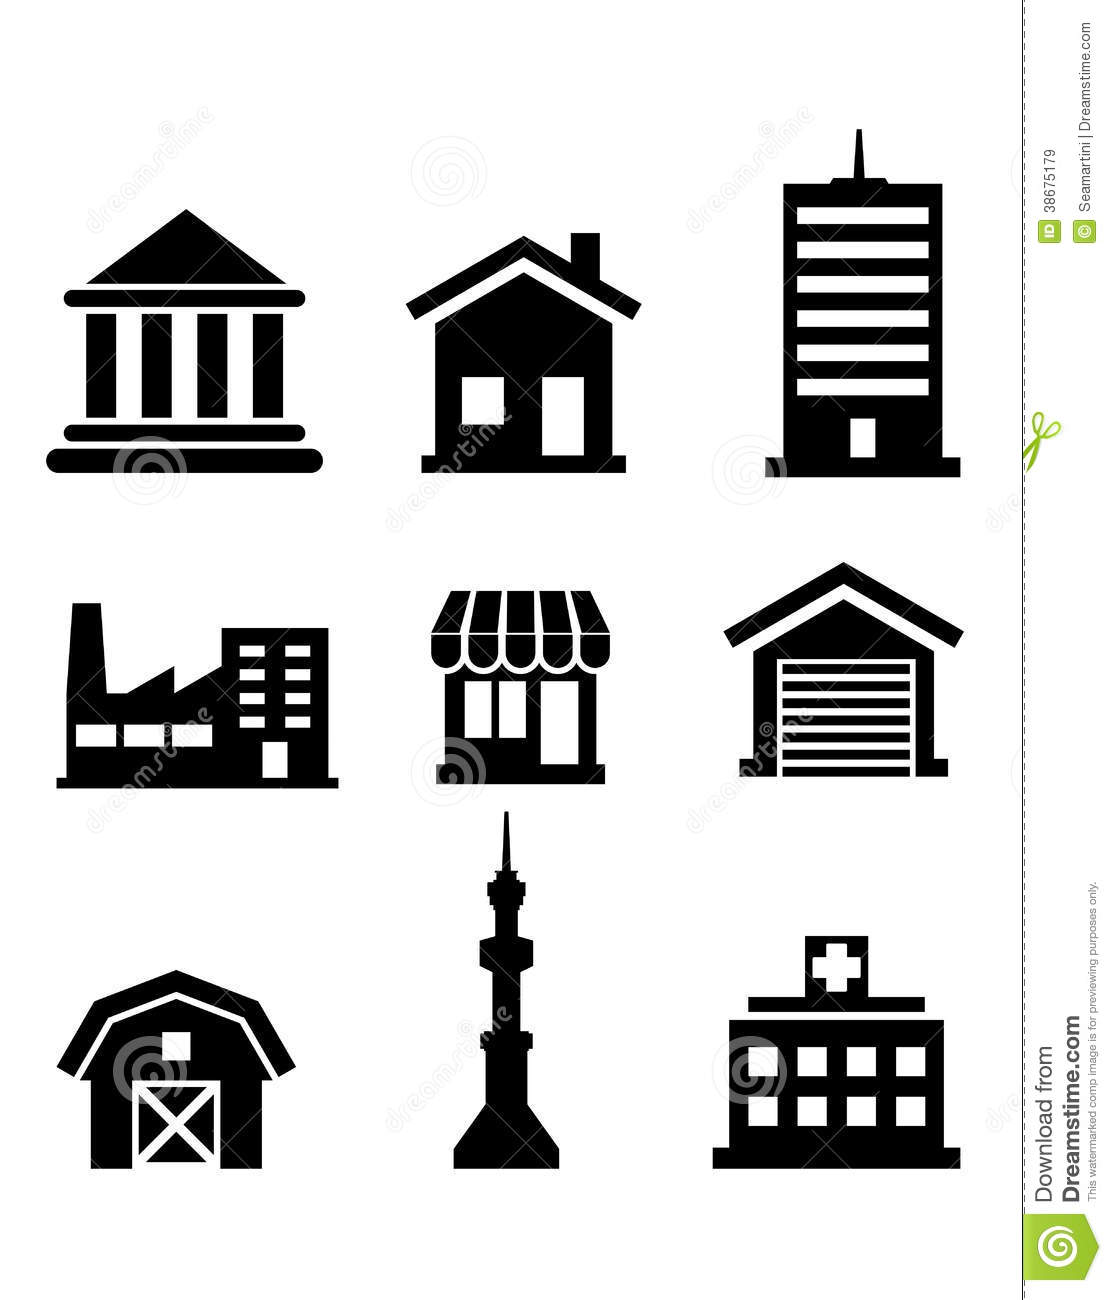 Black and White Building Icon